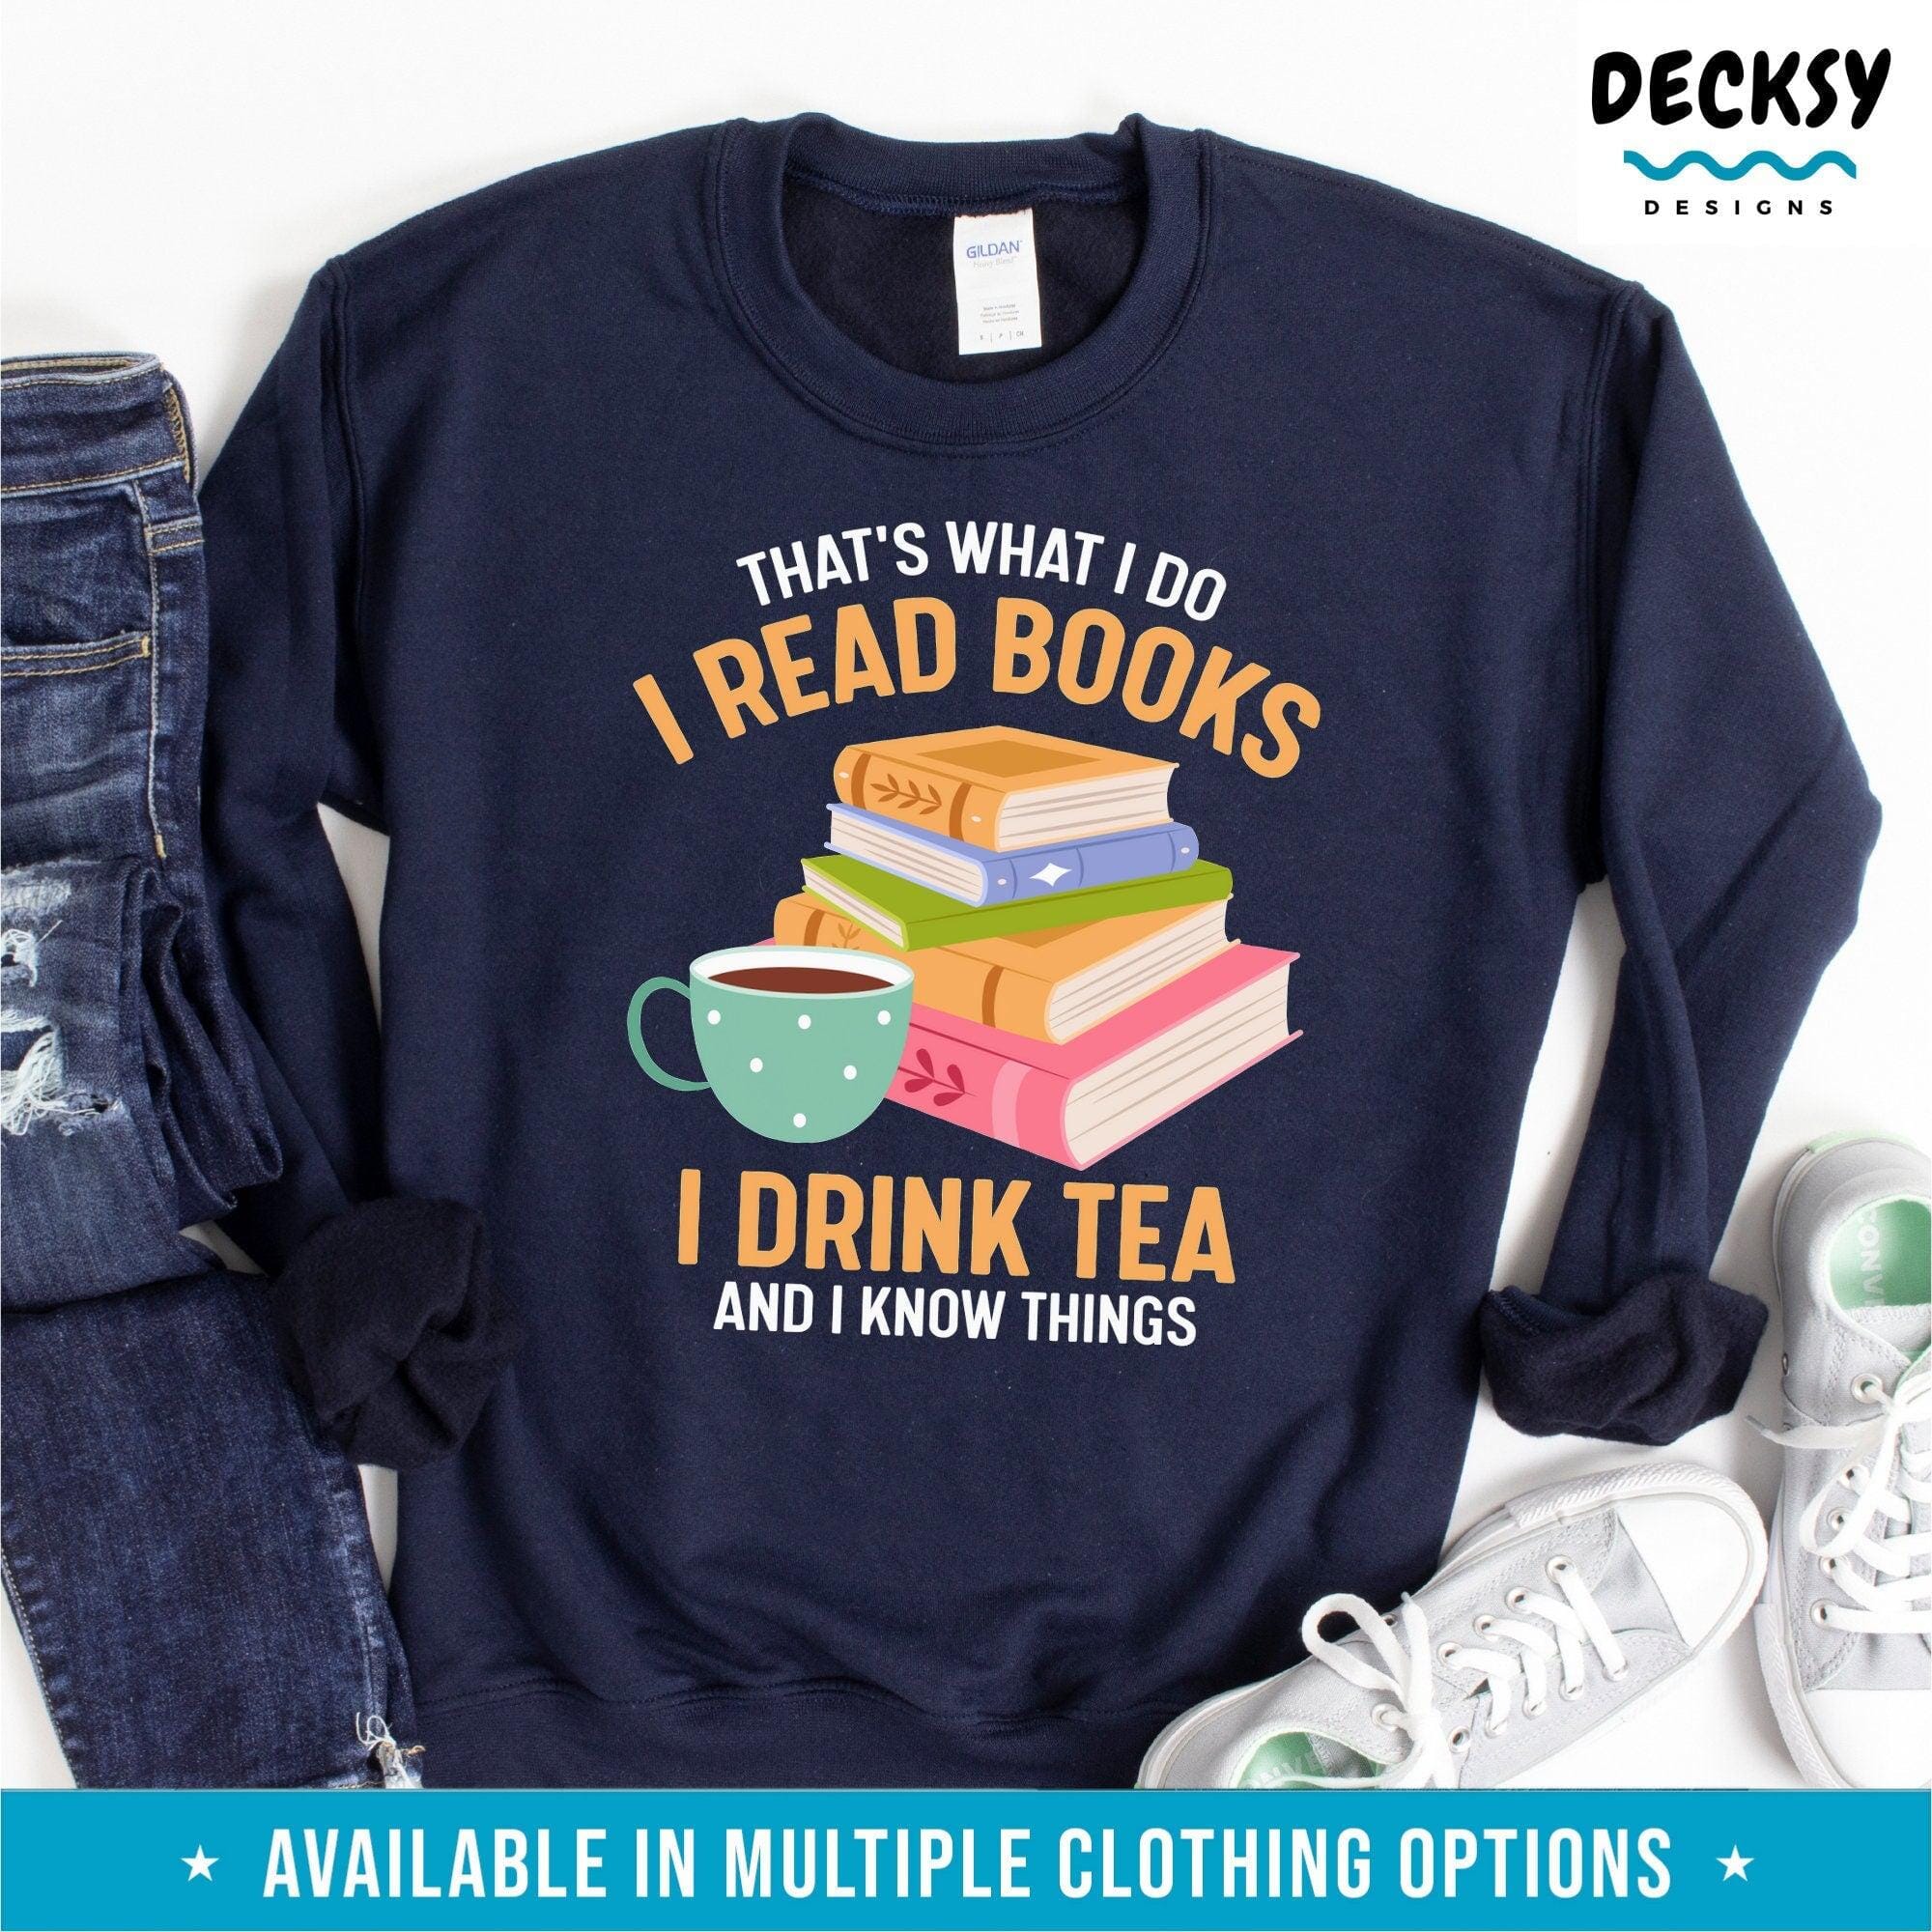 Book Lover Shirt, Gift For Tea Lover-Clothing:Gender-Neutral Adult Clothing:Tops & Tees:T-shirts:Graphic Tees-DecksyDesigns